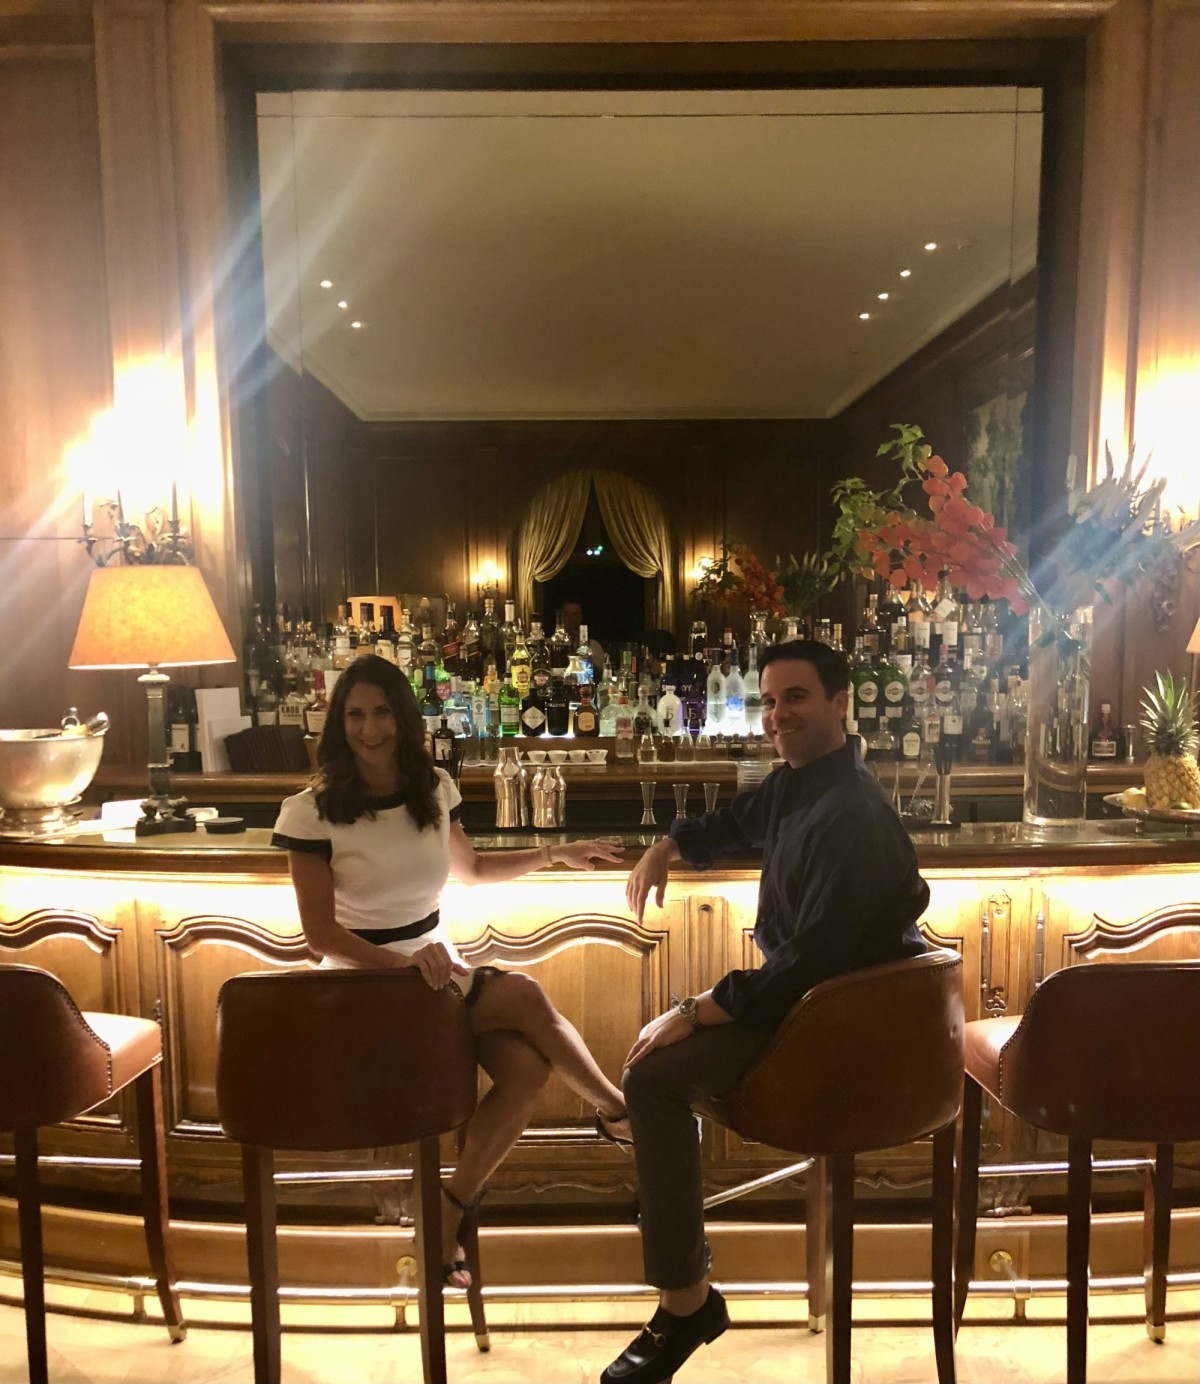 Chateau Bar LeRossini - a woman in a white cocktail dress and a man in a suit sitting at a wood-paneled bar with lamps